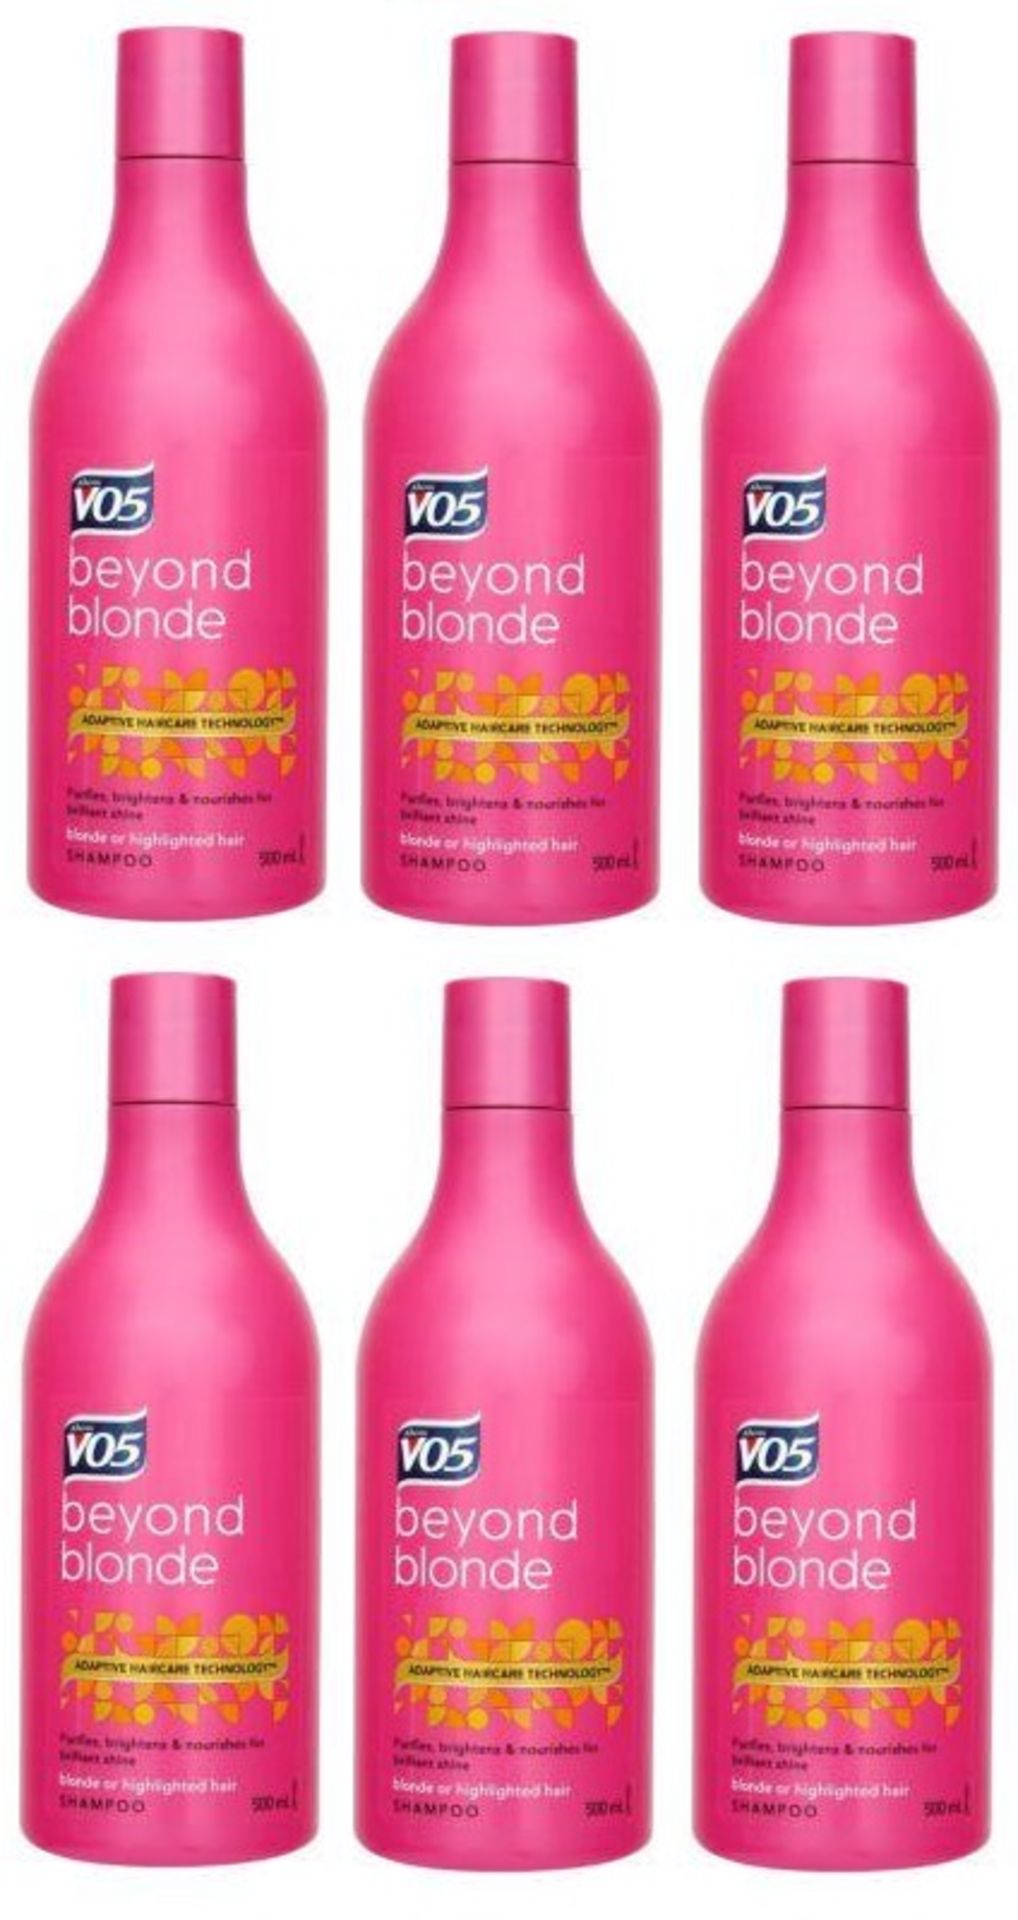 V Brand New Lot Of 6 VO5 Beyond Blonde Shampoo 500ml - Purifies Brightens & Nourishes For